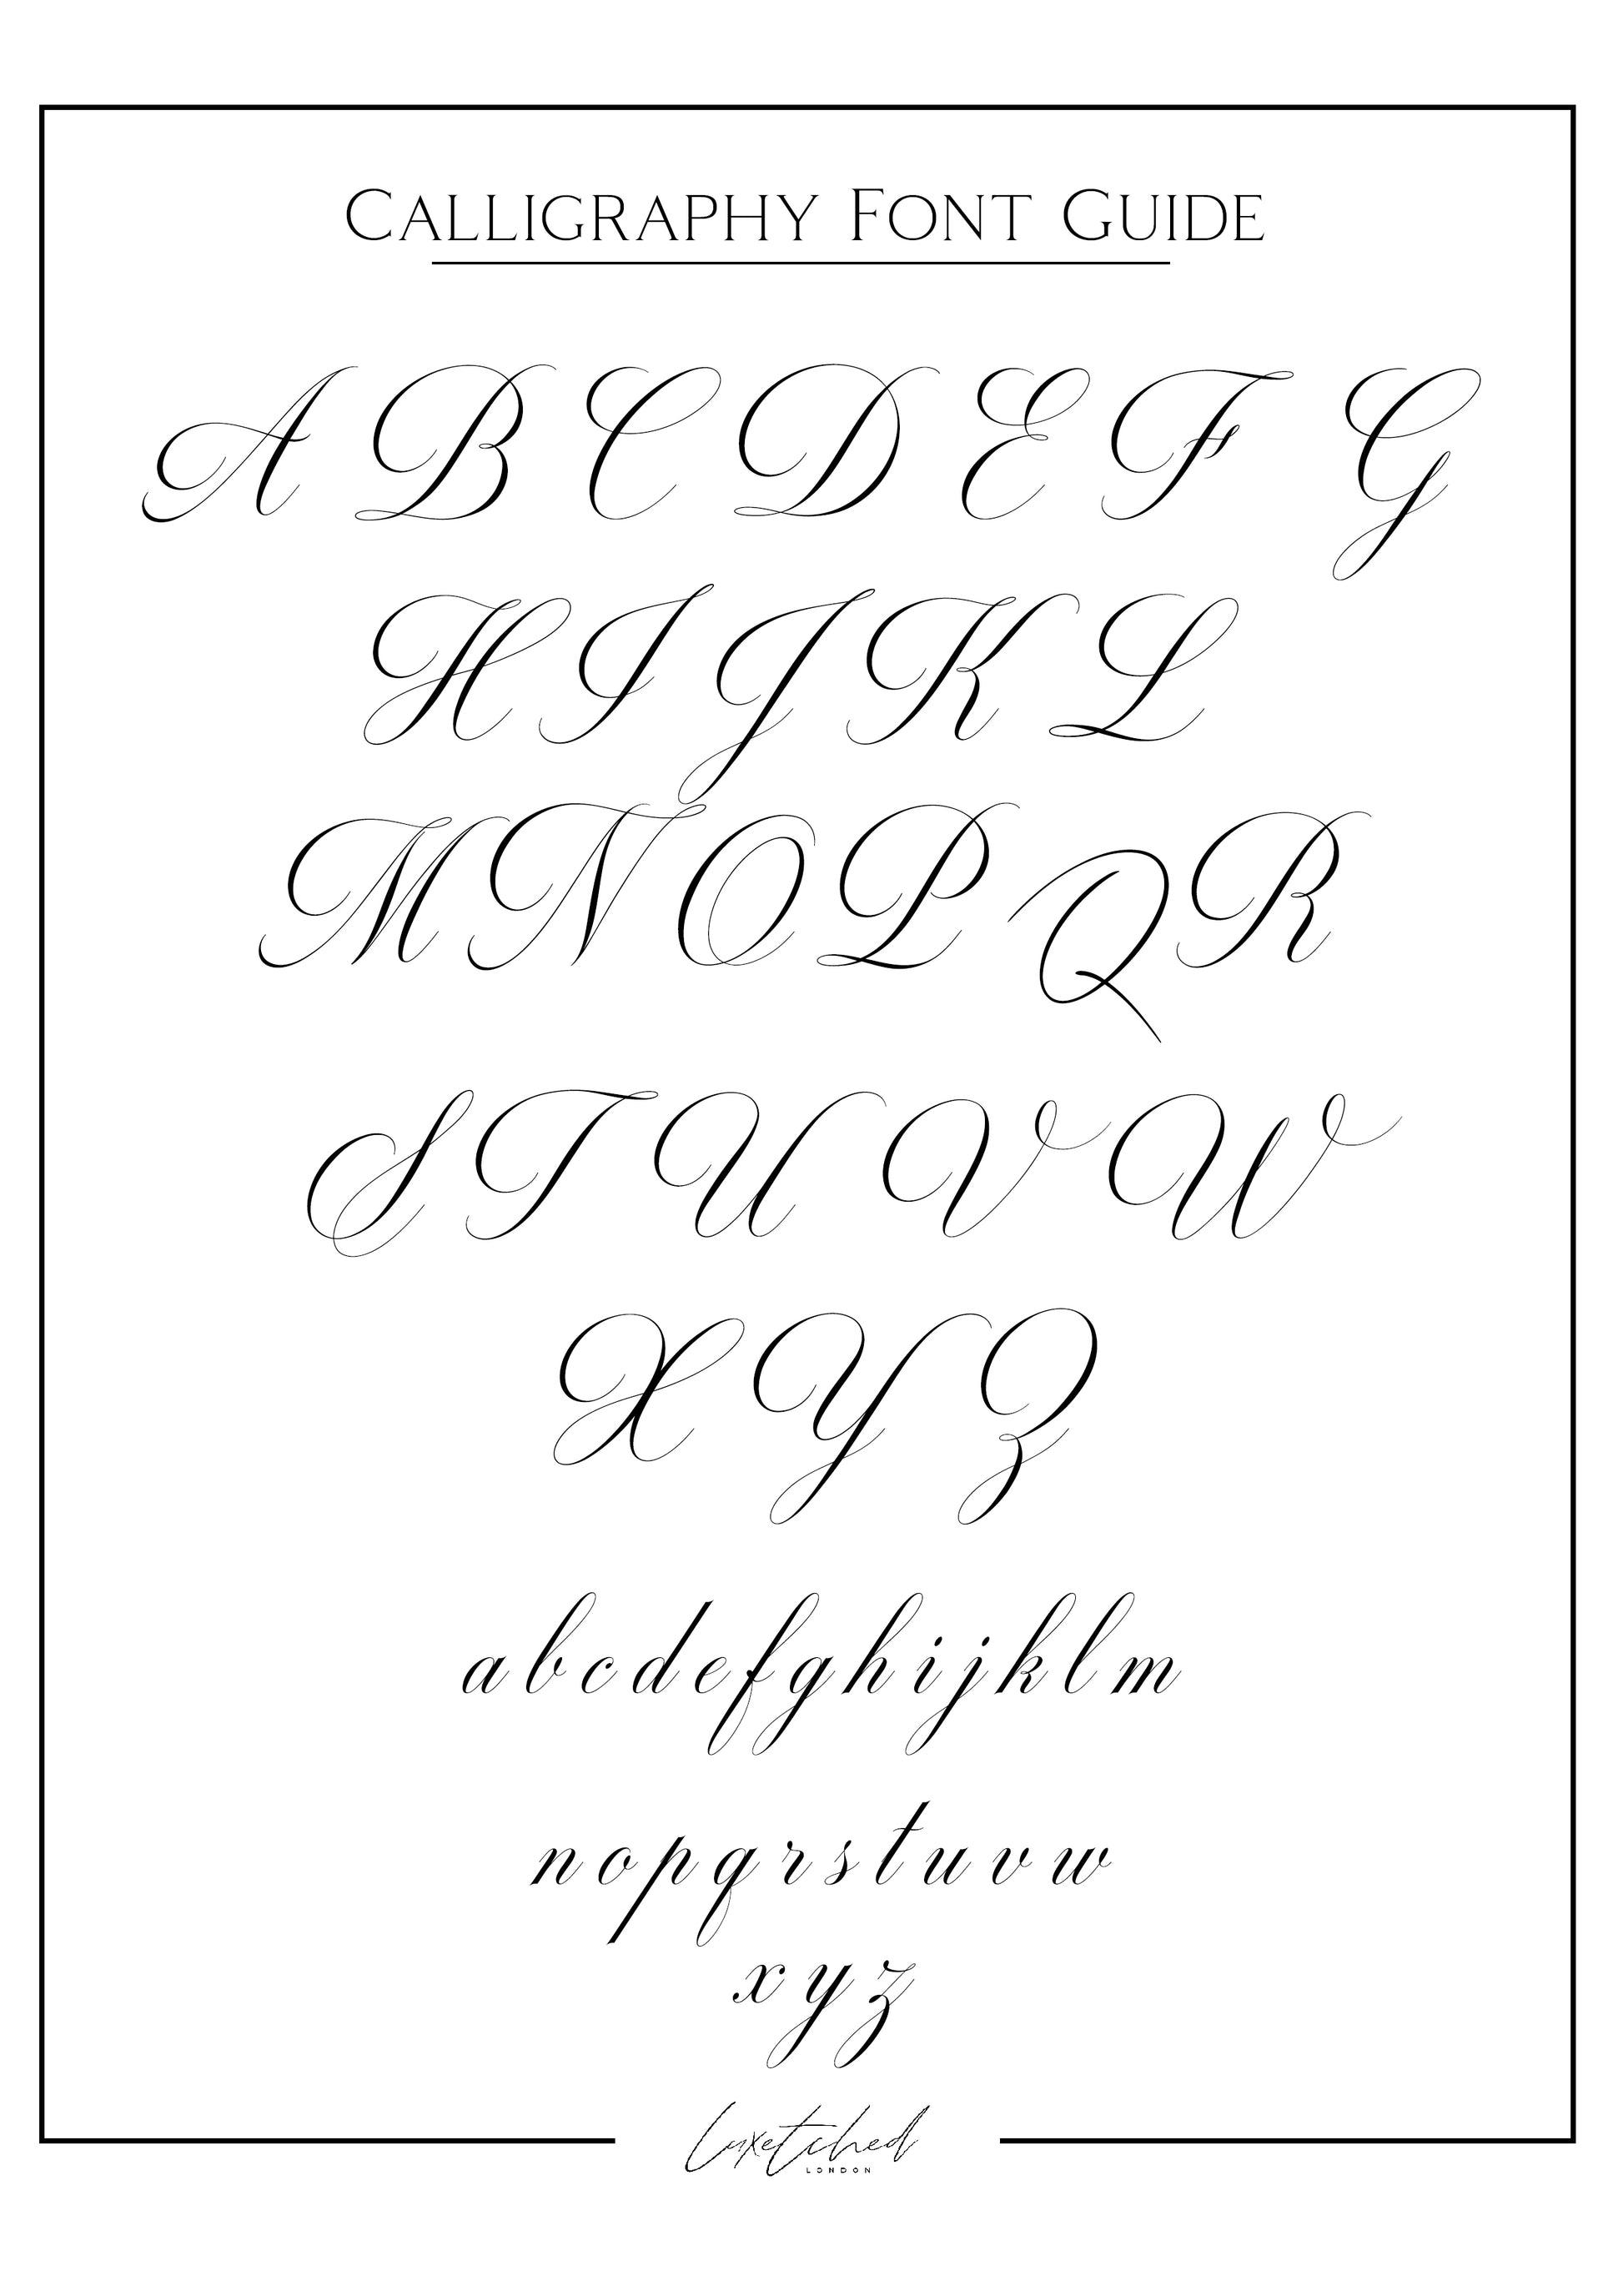 Calligraphy Font Guide.jpg